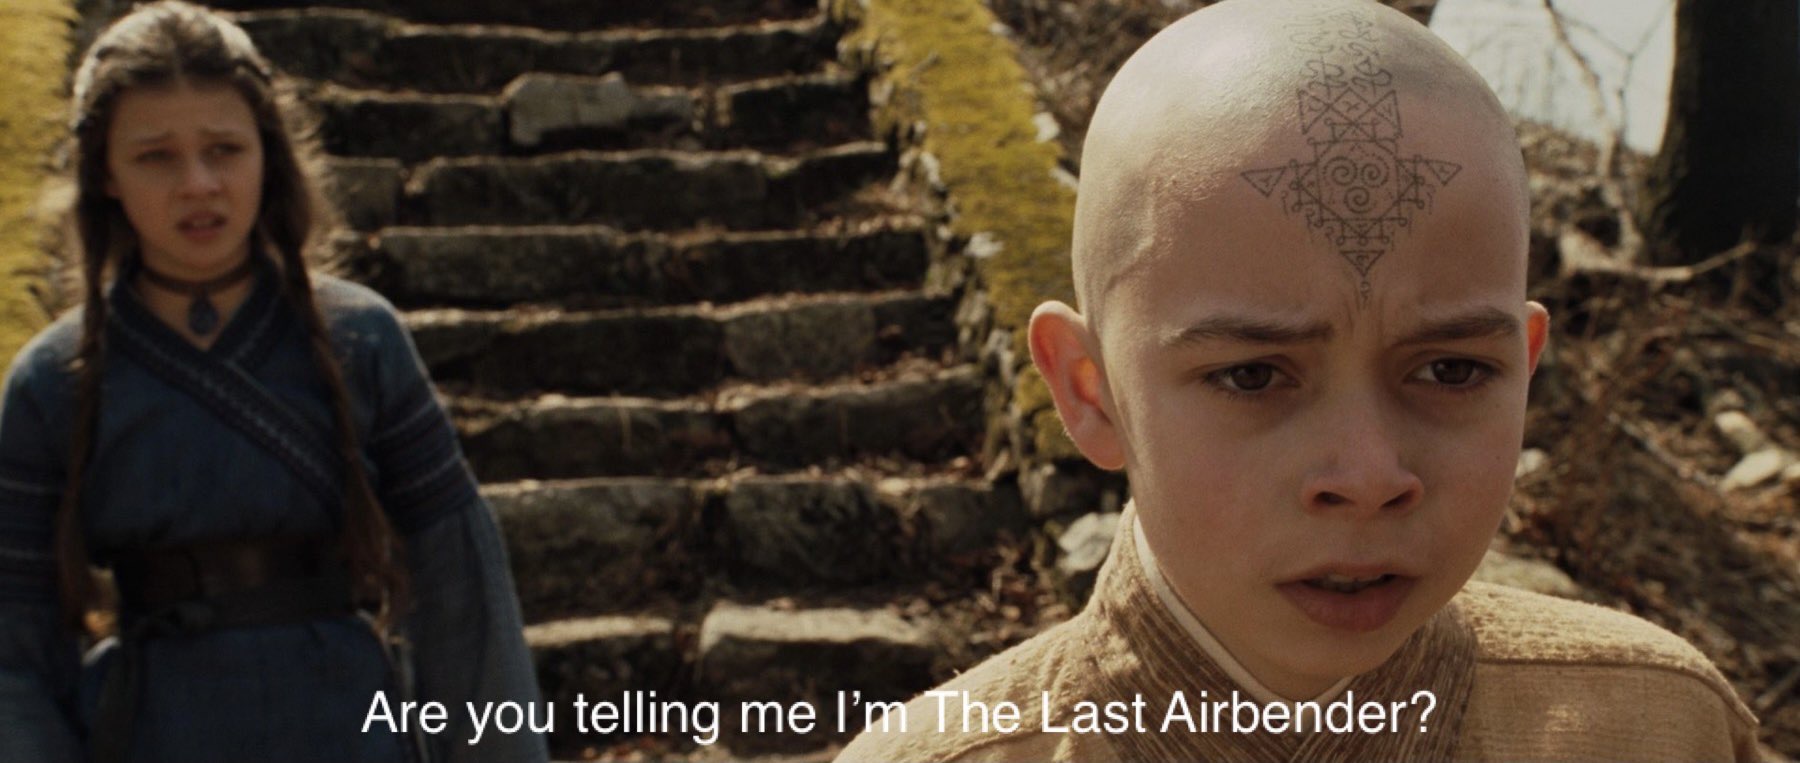 He Didn't Say That -Movie Titles in Movie Lines- avatar the last airbender live action - Are you telling me I'm The Last Airbender?